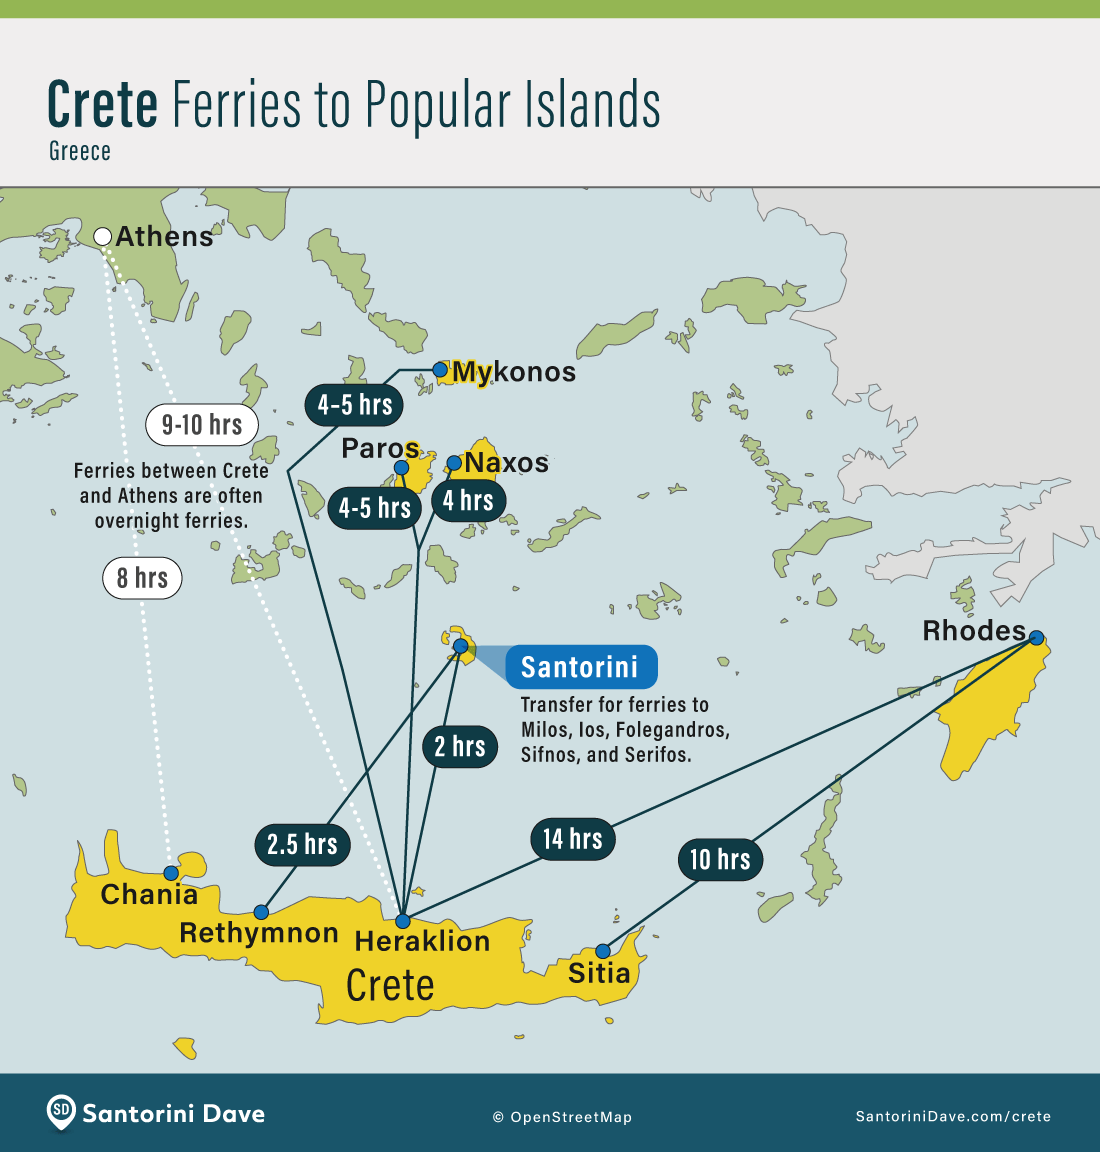 Map showing popular ferry routes from Crete to Athens and nearby islands